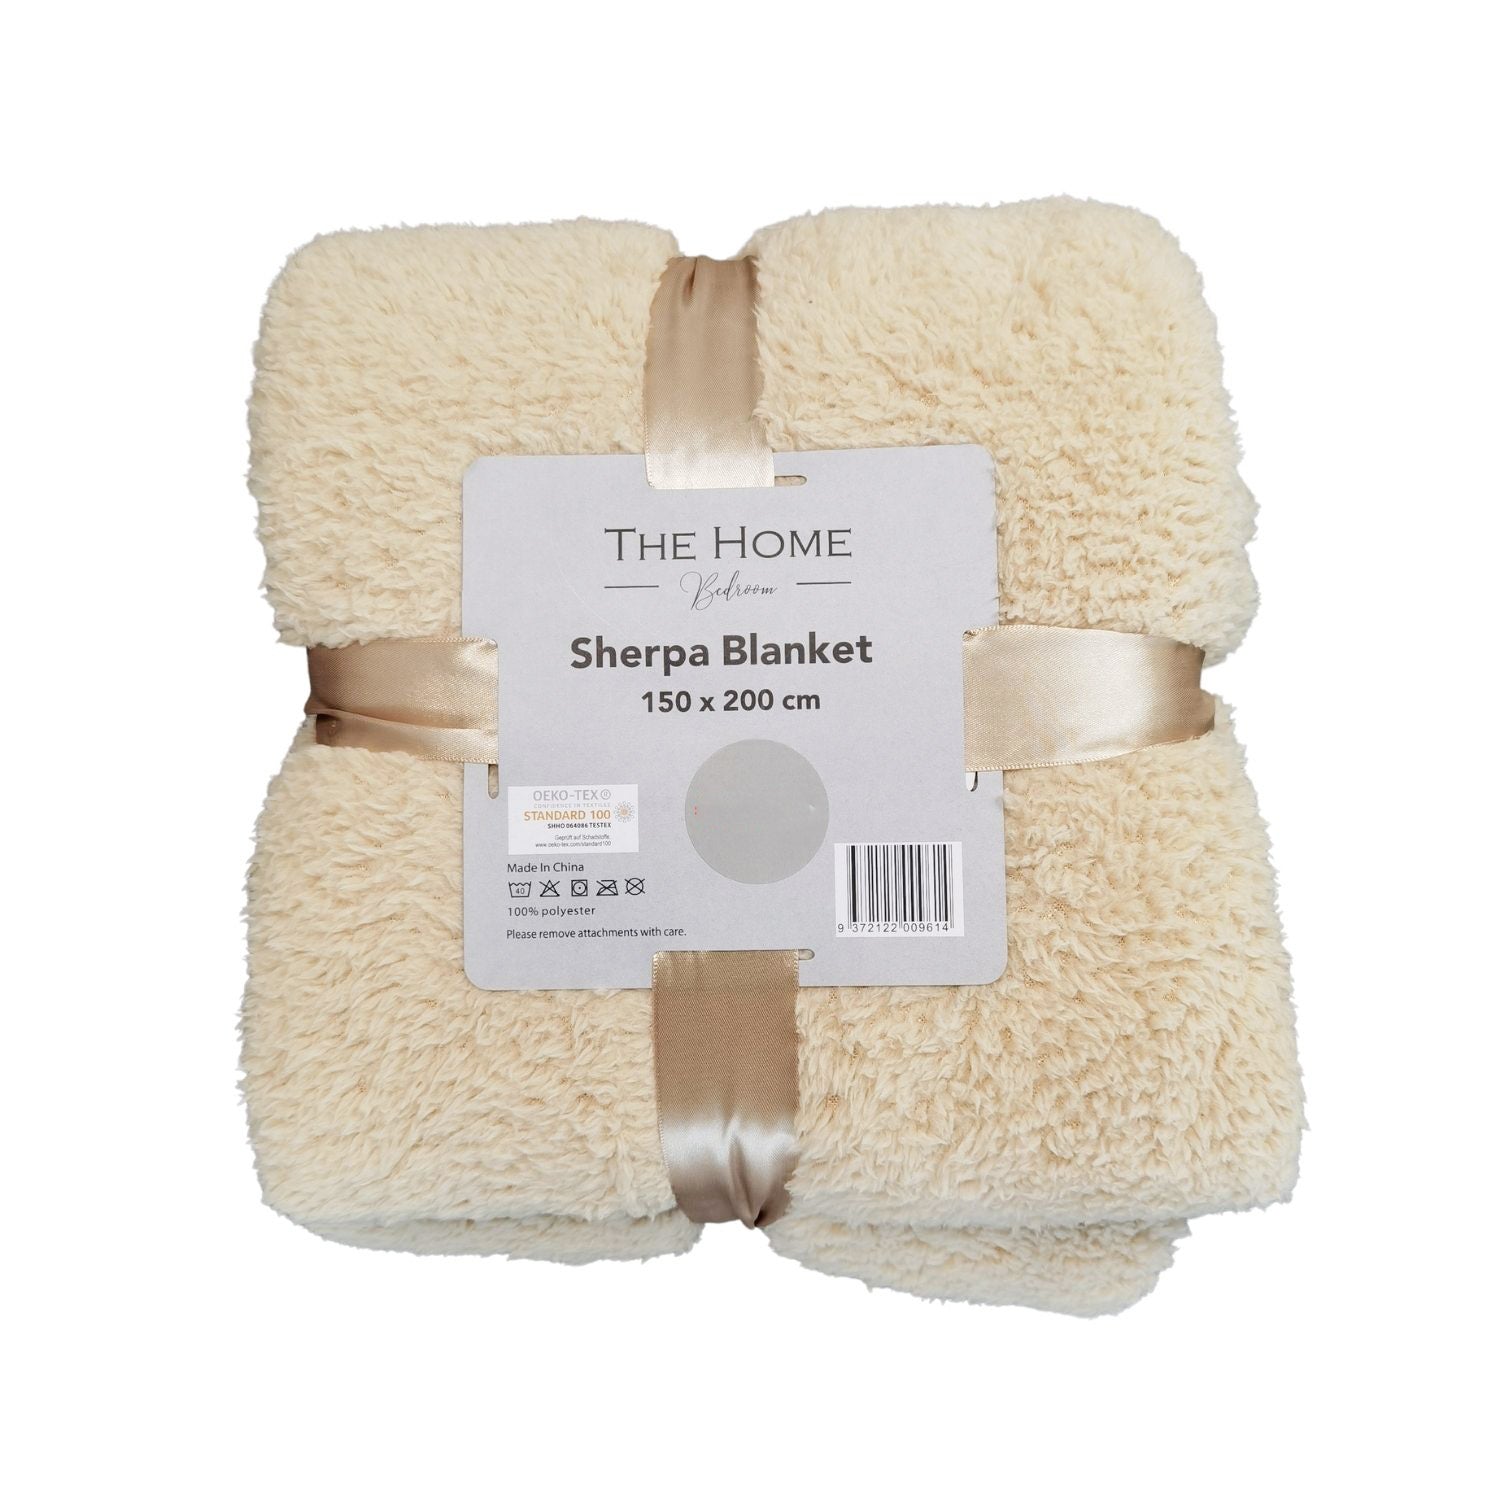 The Home Bedroom Sherpa Throw 150cm x 200cm - Beige 1 Shaws Department Stores